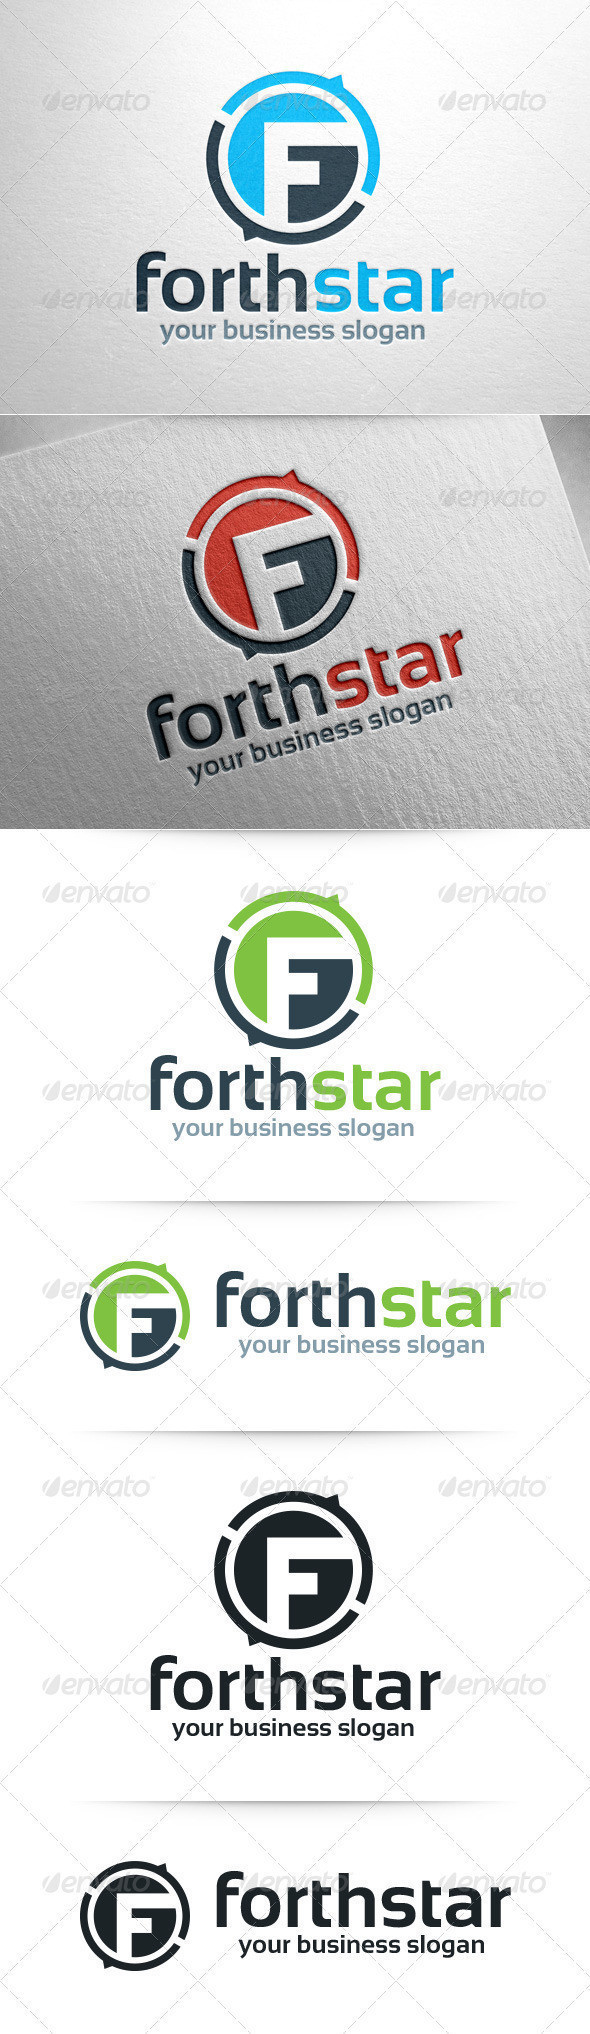 Forth star logo template